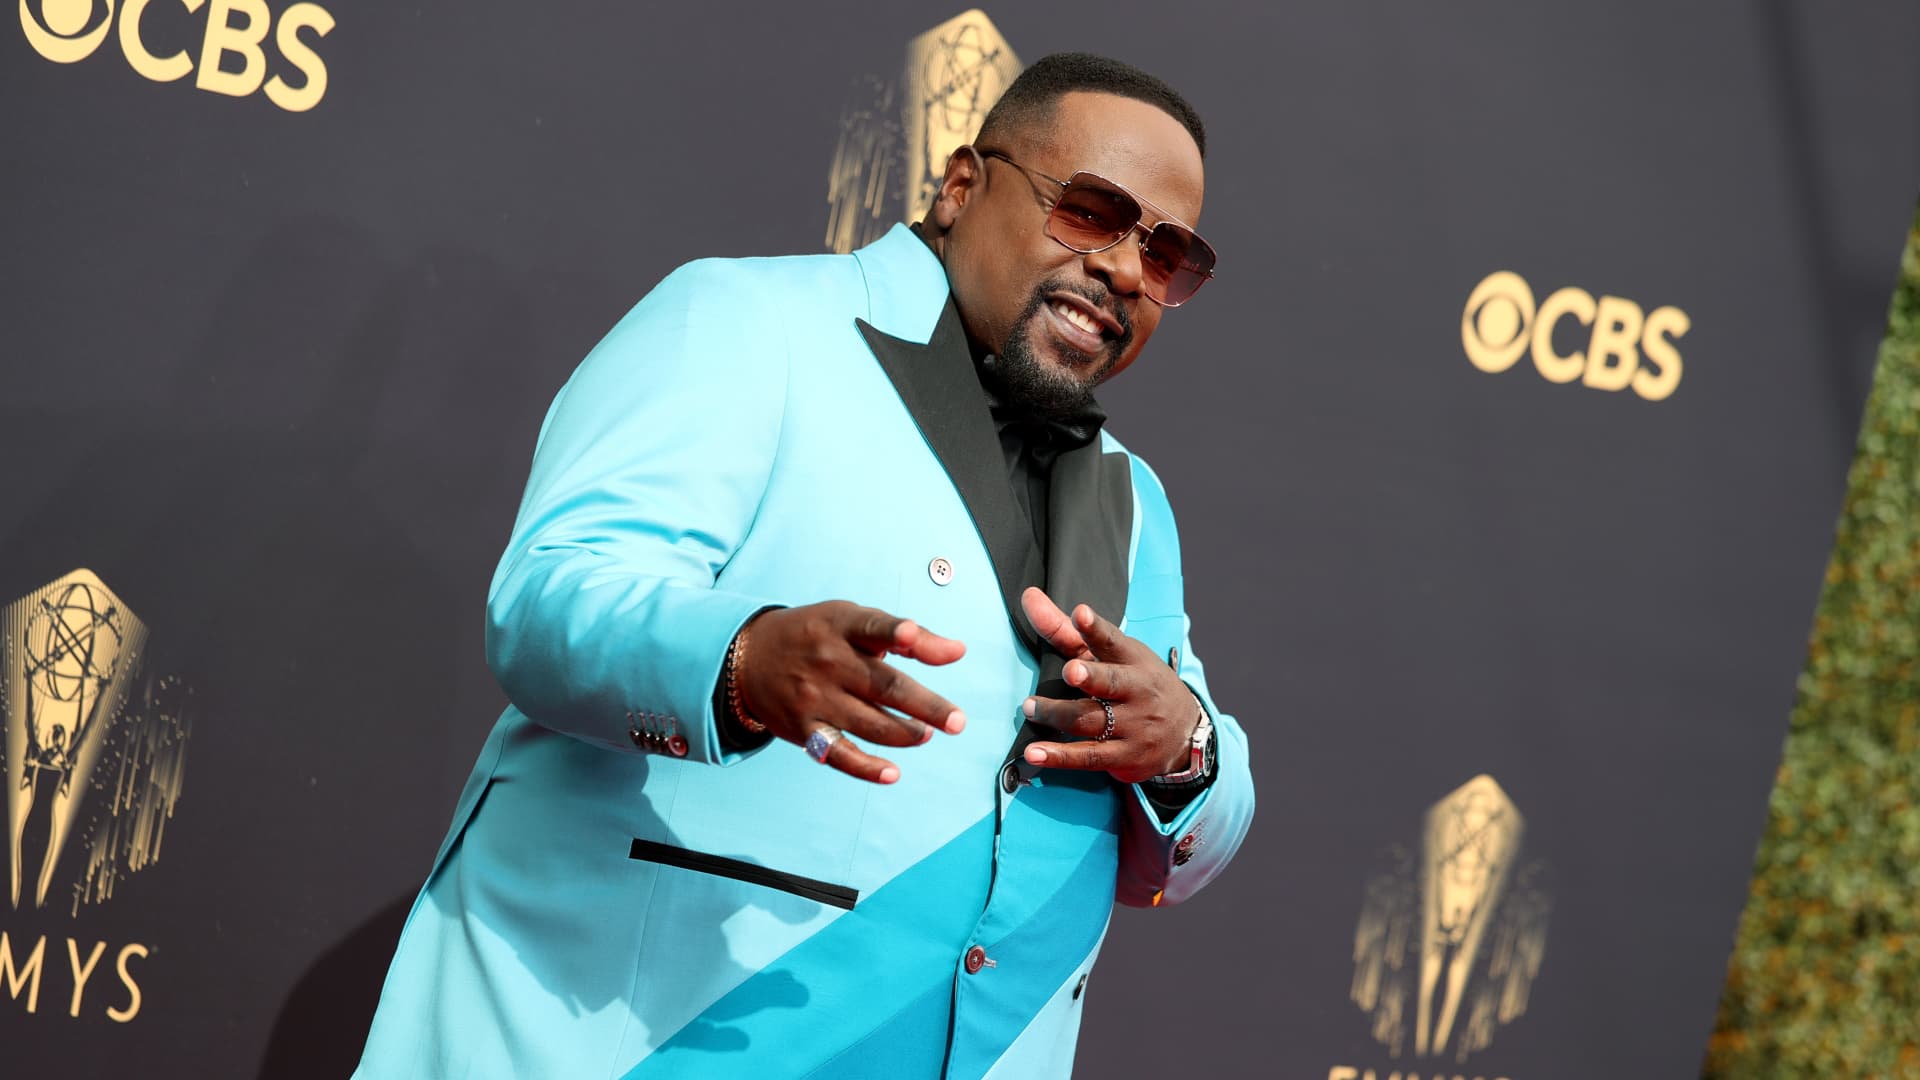 Host Cedric the Entertainer attends the 73rd Primetime Emmy Awards on September 19, 2021 in Los Angeles, California.